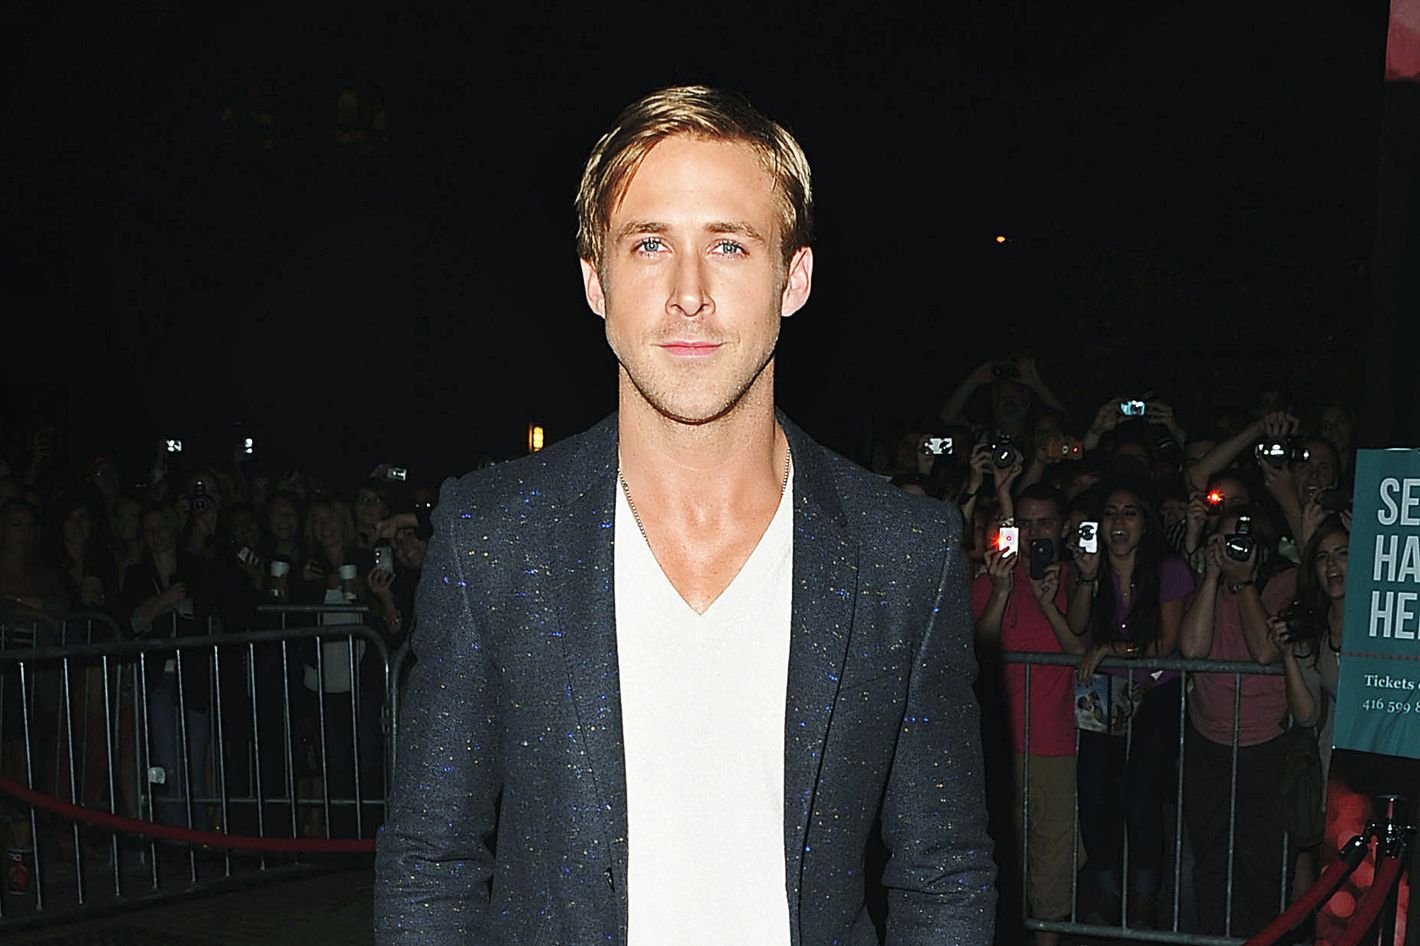 The shirt with blue stripes worn by Jacob (Ryan Gosling) in the